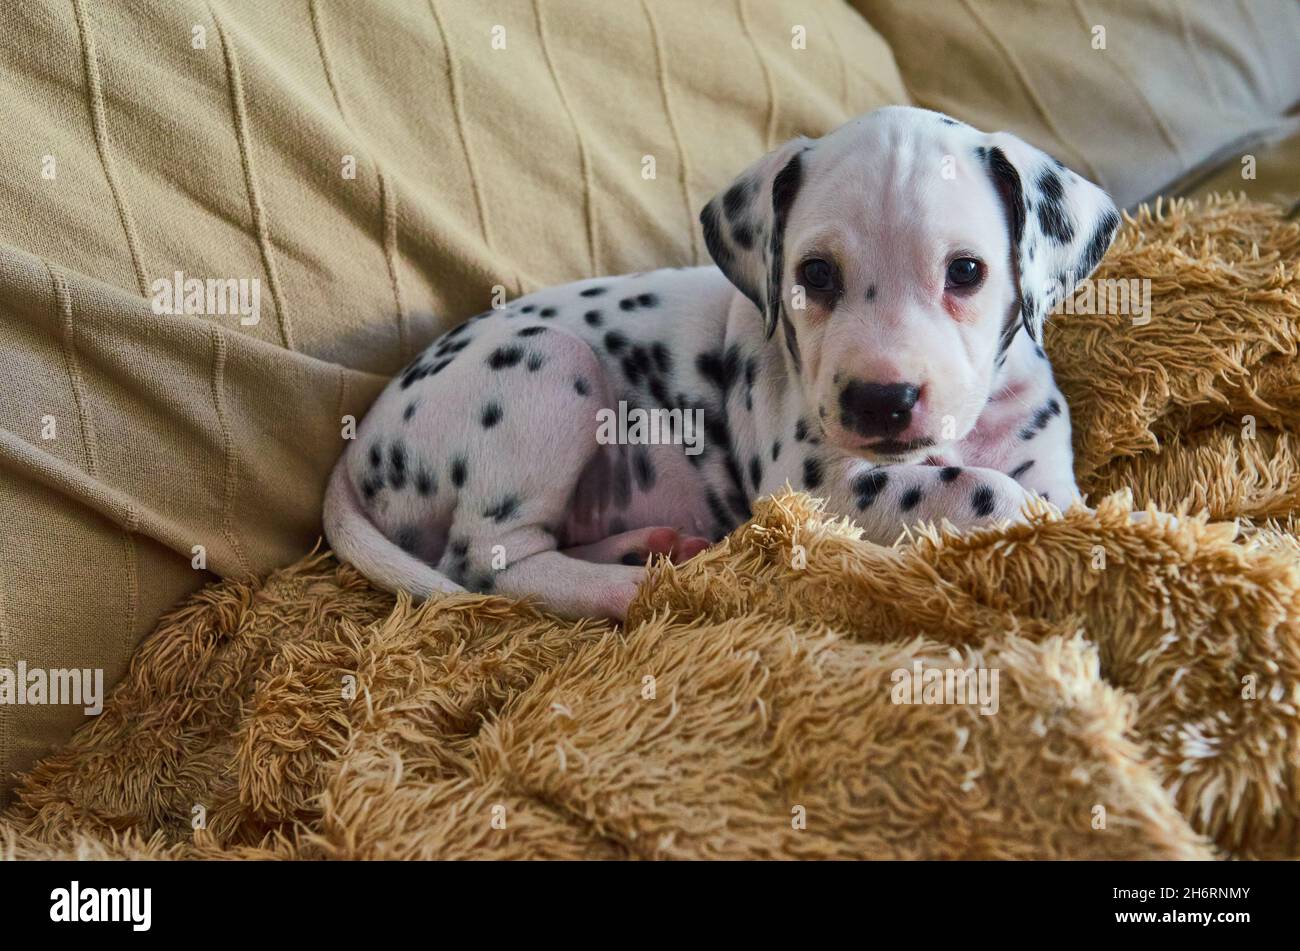 Brown And White Dalmatian High Resolution Stock Photography and ...